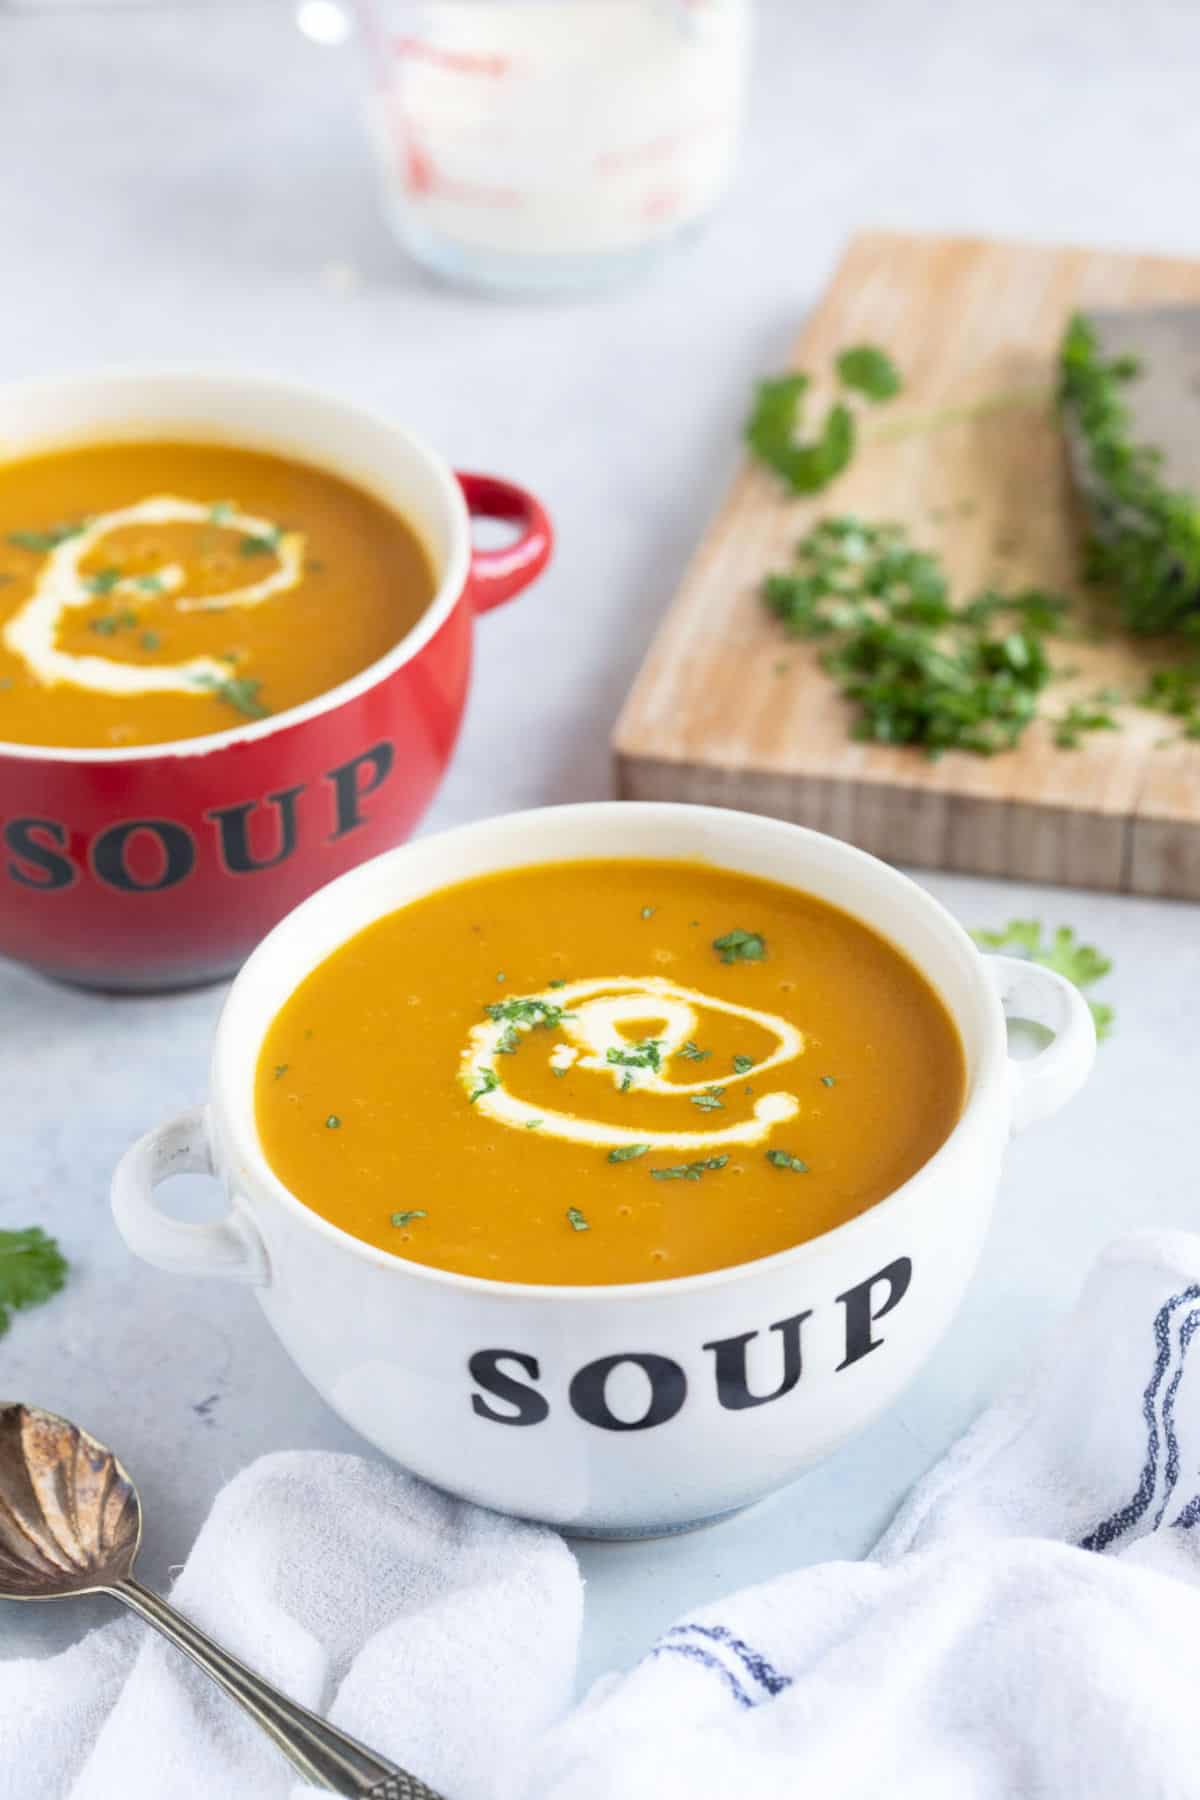 Two bowls of spiced carrot and parsnip soup with a jug of cream in the background.